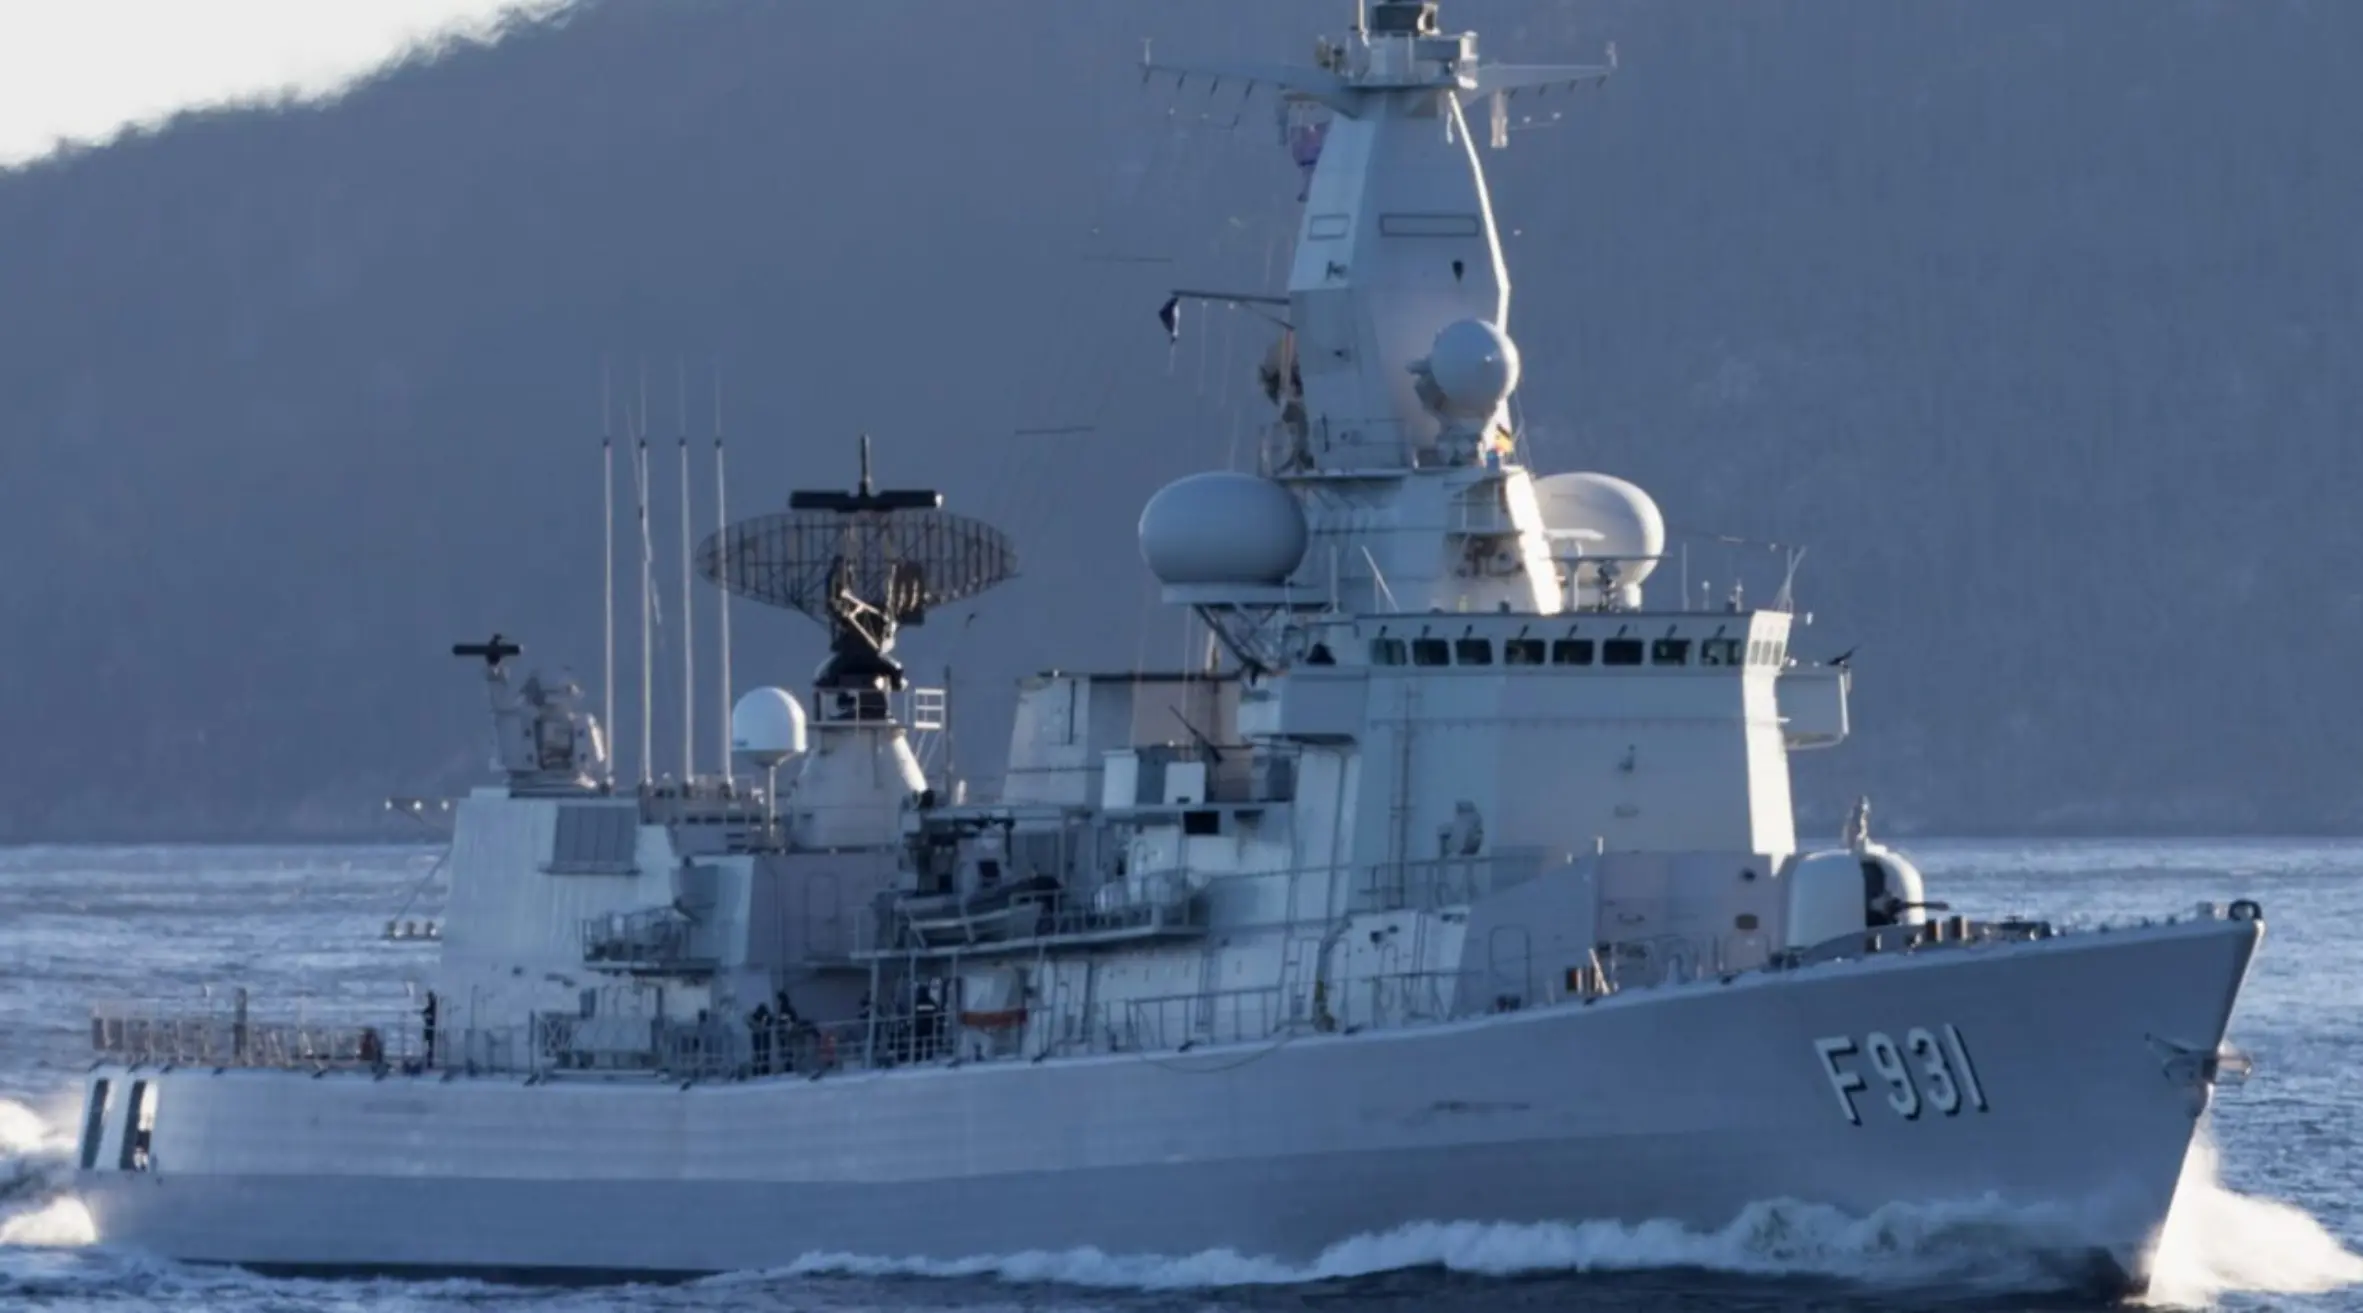 Belgium’s frigate Louise-Marie returns after Red Sea mission success